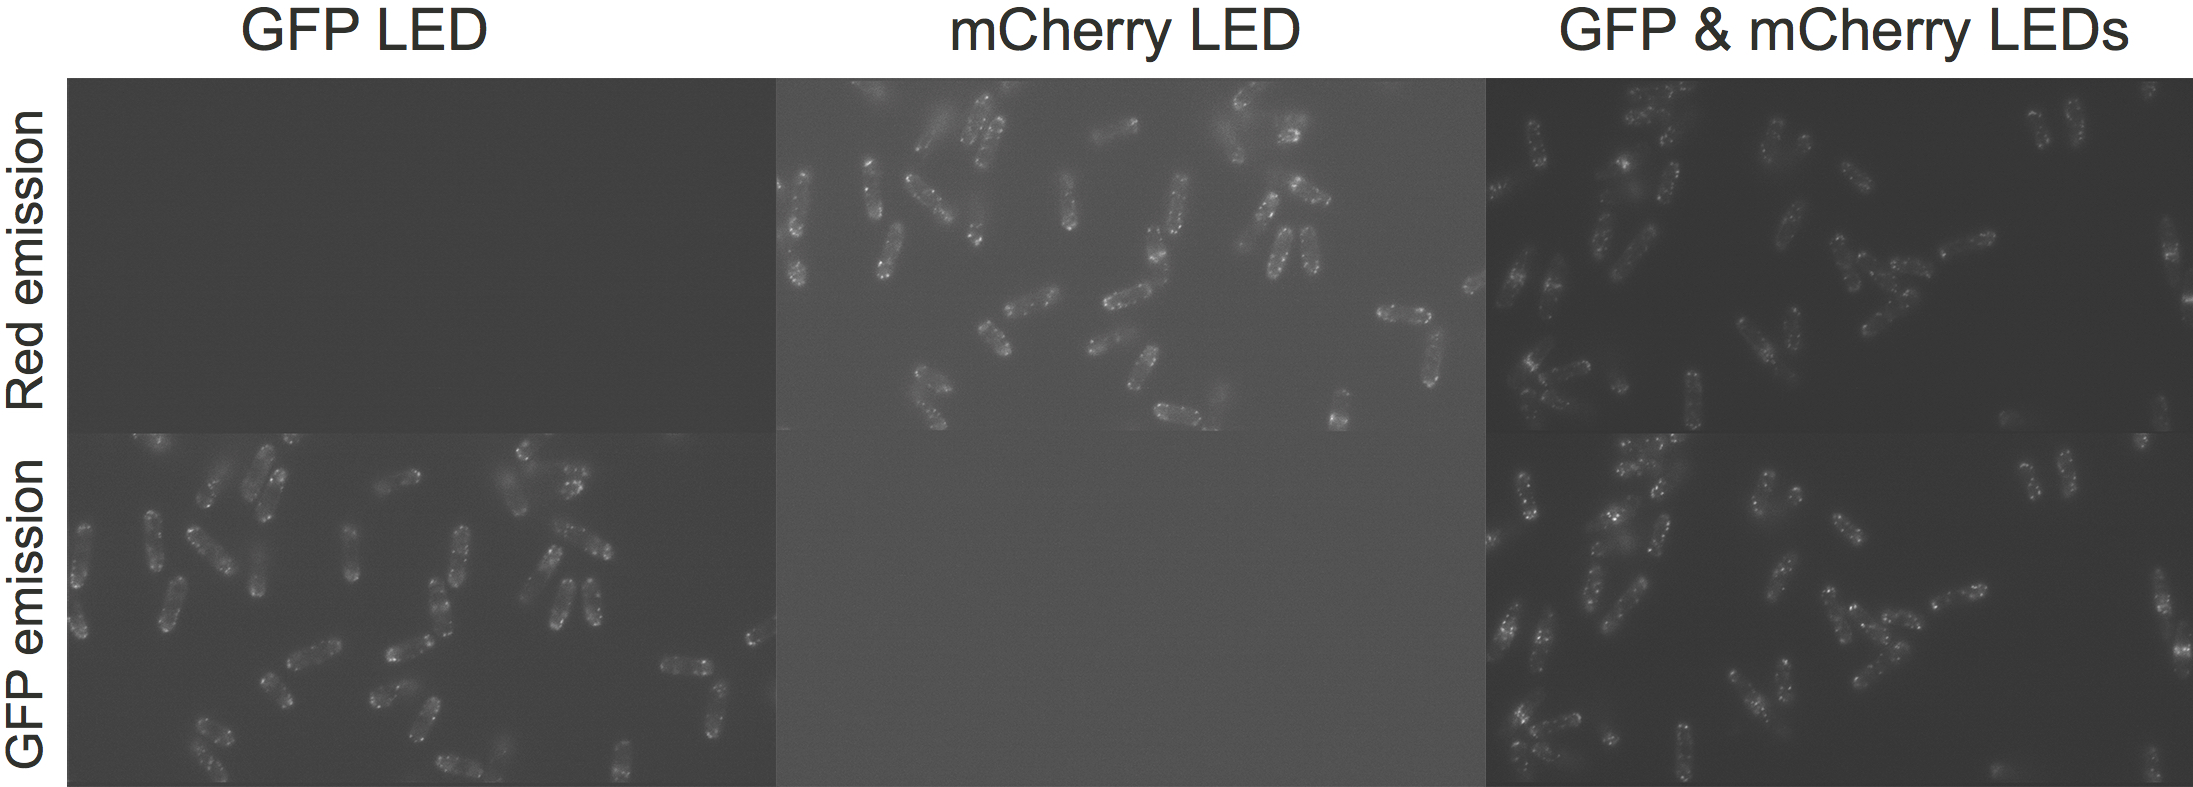 (Optosplit and Optospin in series mounted on c-mount before the camera) shows different images acquired when only the GFP LED is triggered (Left); the mCherry LED is triggered (middle); or both are sequentially triggered (right)